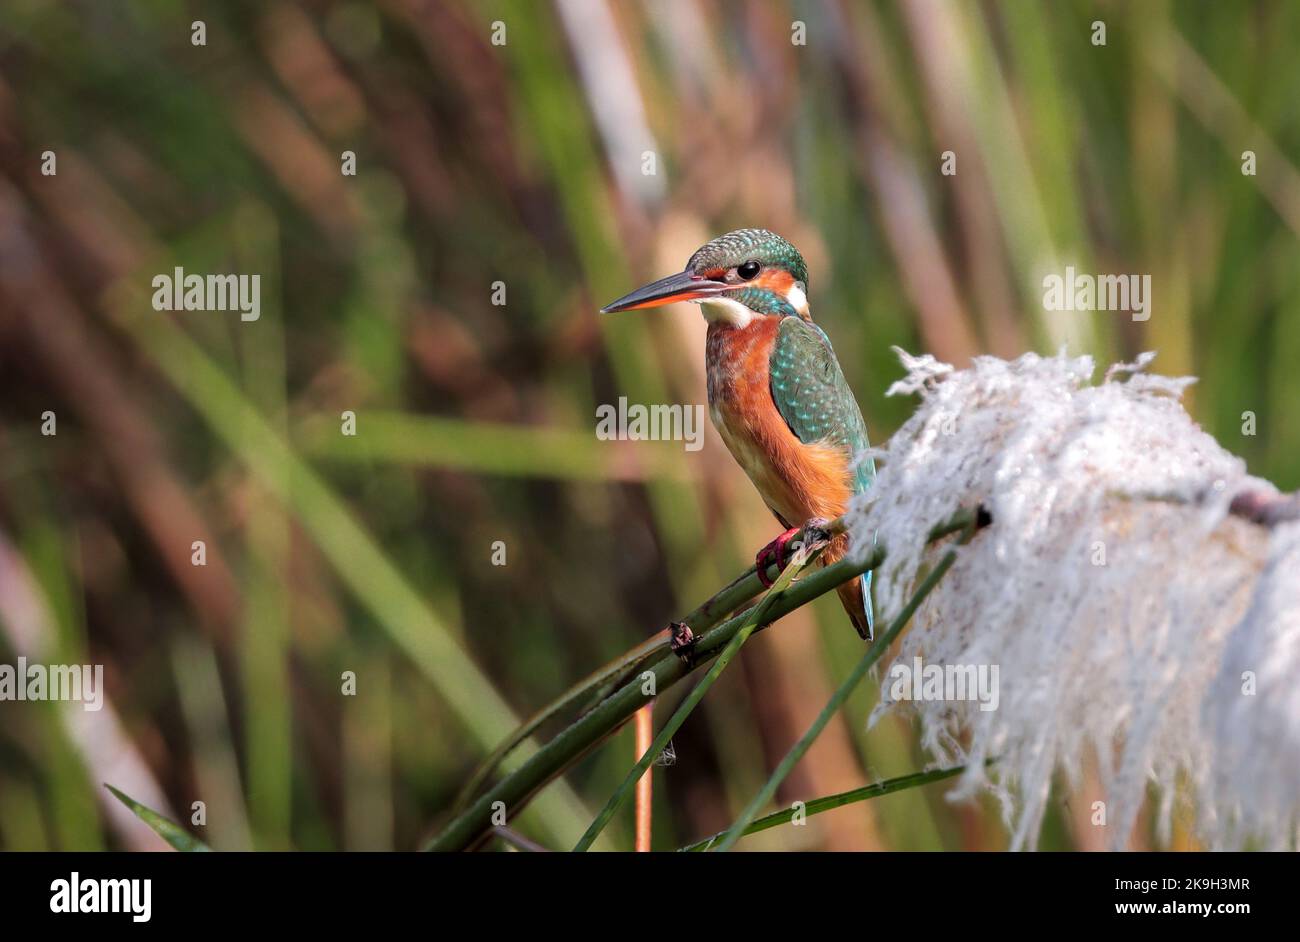 The common kingfisher (Alcedo atthis), also known as the Eurasian kingfisher and river kingfisher. Stock Photo